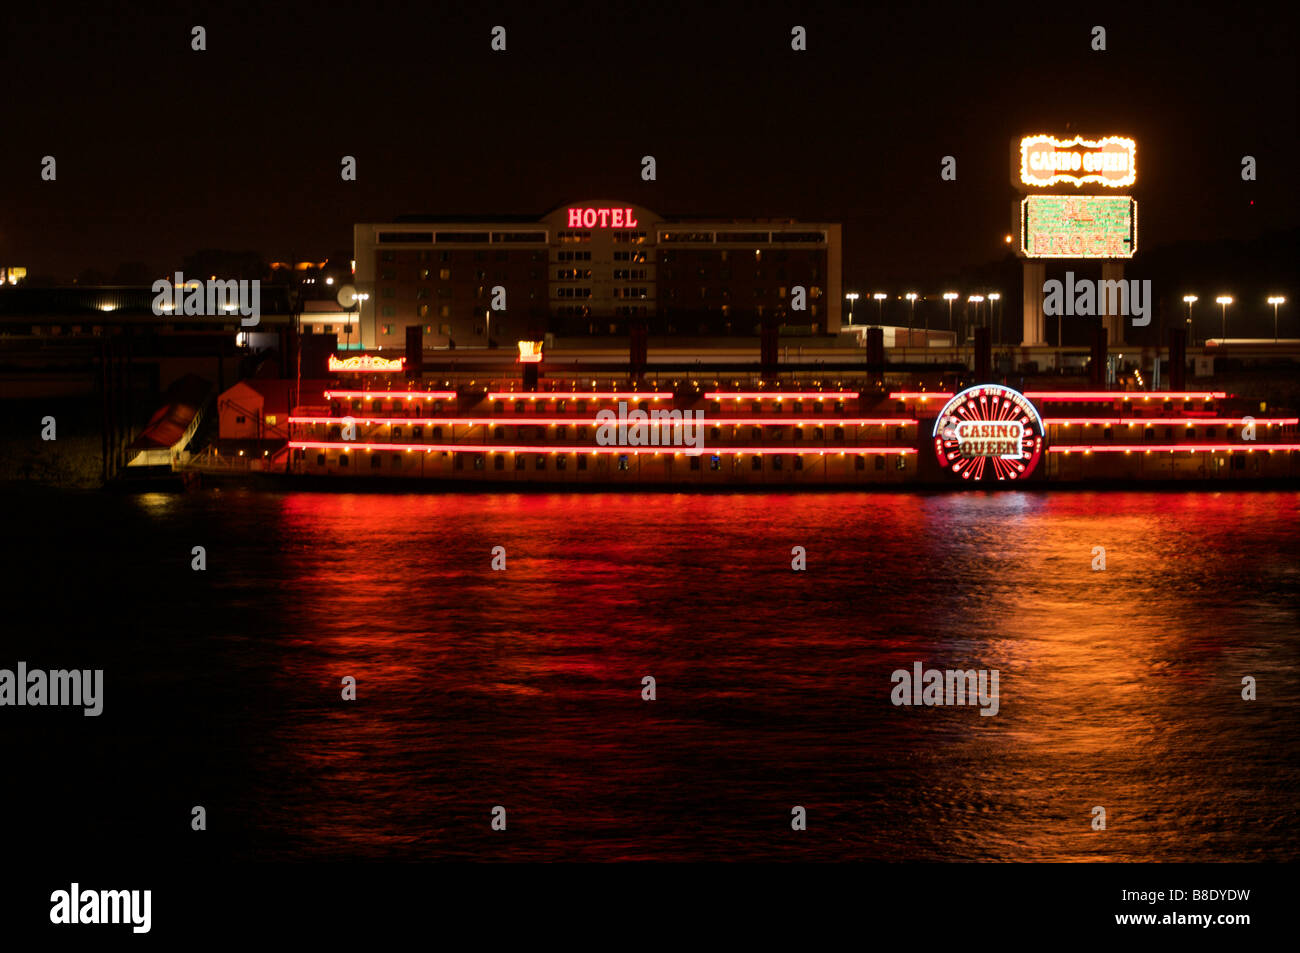 Casino river boat on the Mississippi river in St. Louis Missouri at night with neon lights reflecting on the water with hotel Stock Photo